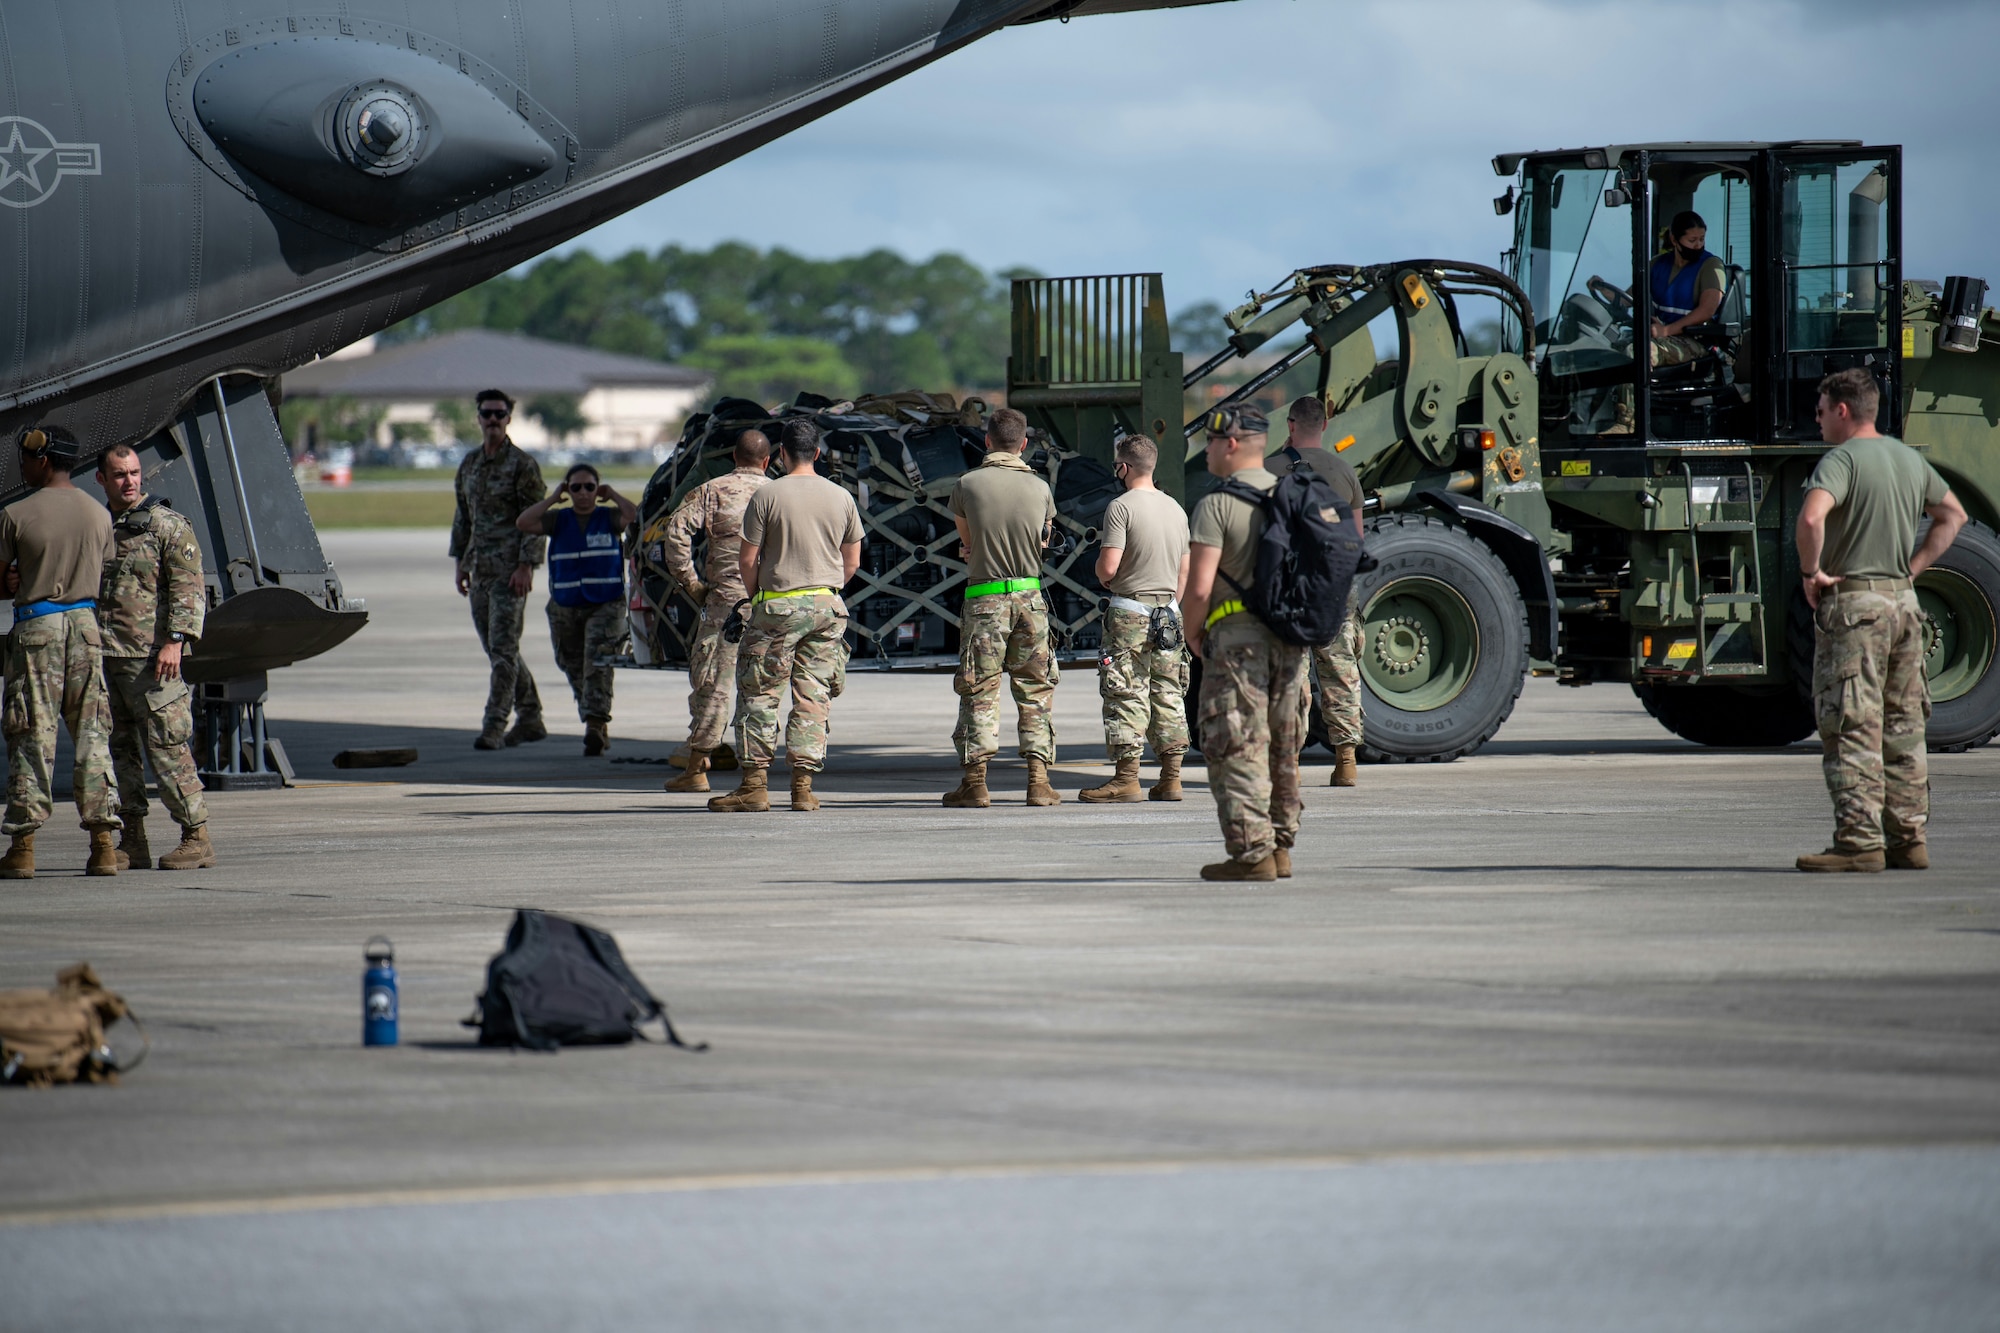 U.S. Air Force Airmen assigned to Hurlburt Field, Florida unload baggage from an MC-130H Combat Talon II aircraft Oct. 6, 2021. Two MC-130H’s returned from a deployment to see their families waiting on the flightline. (U.S. Air Force photo by Staff Sgt. Rito Smith)